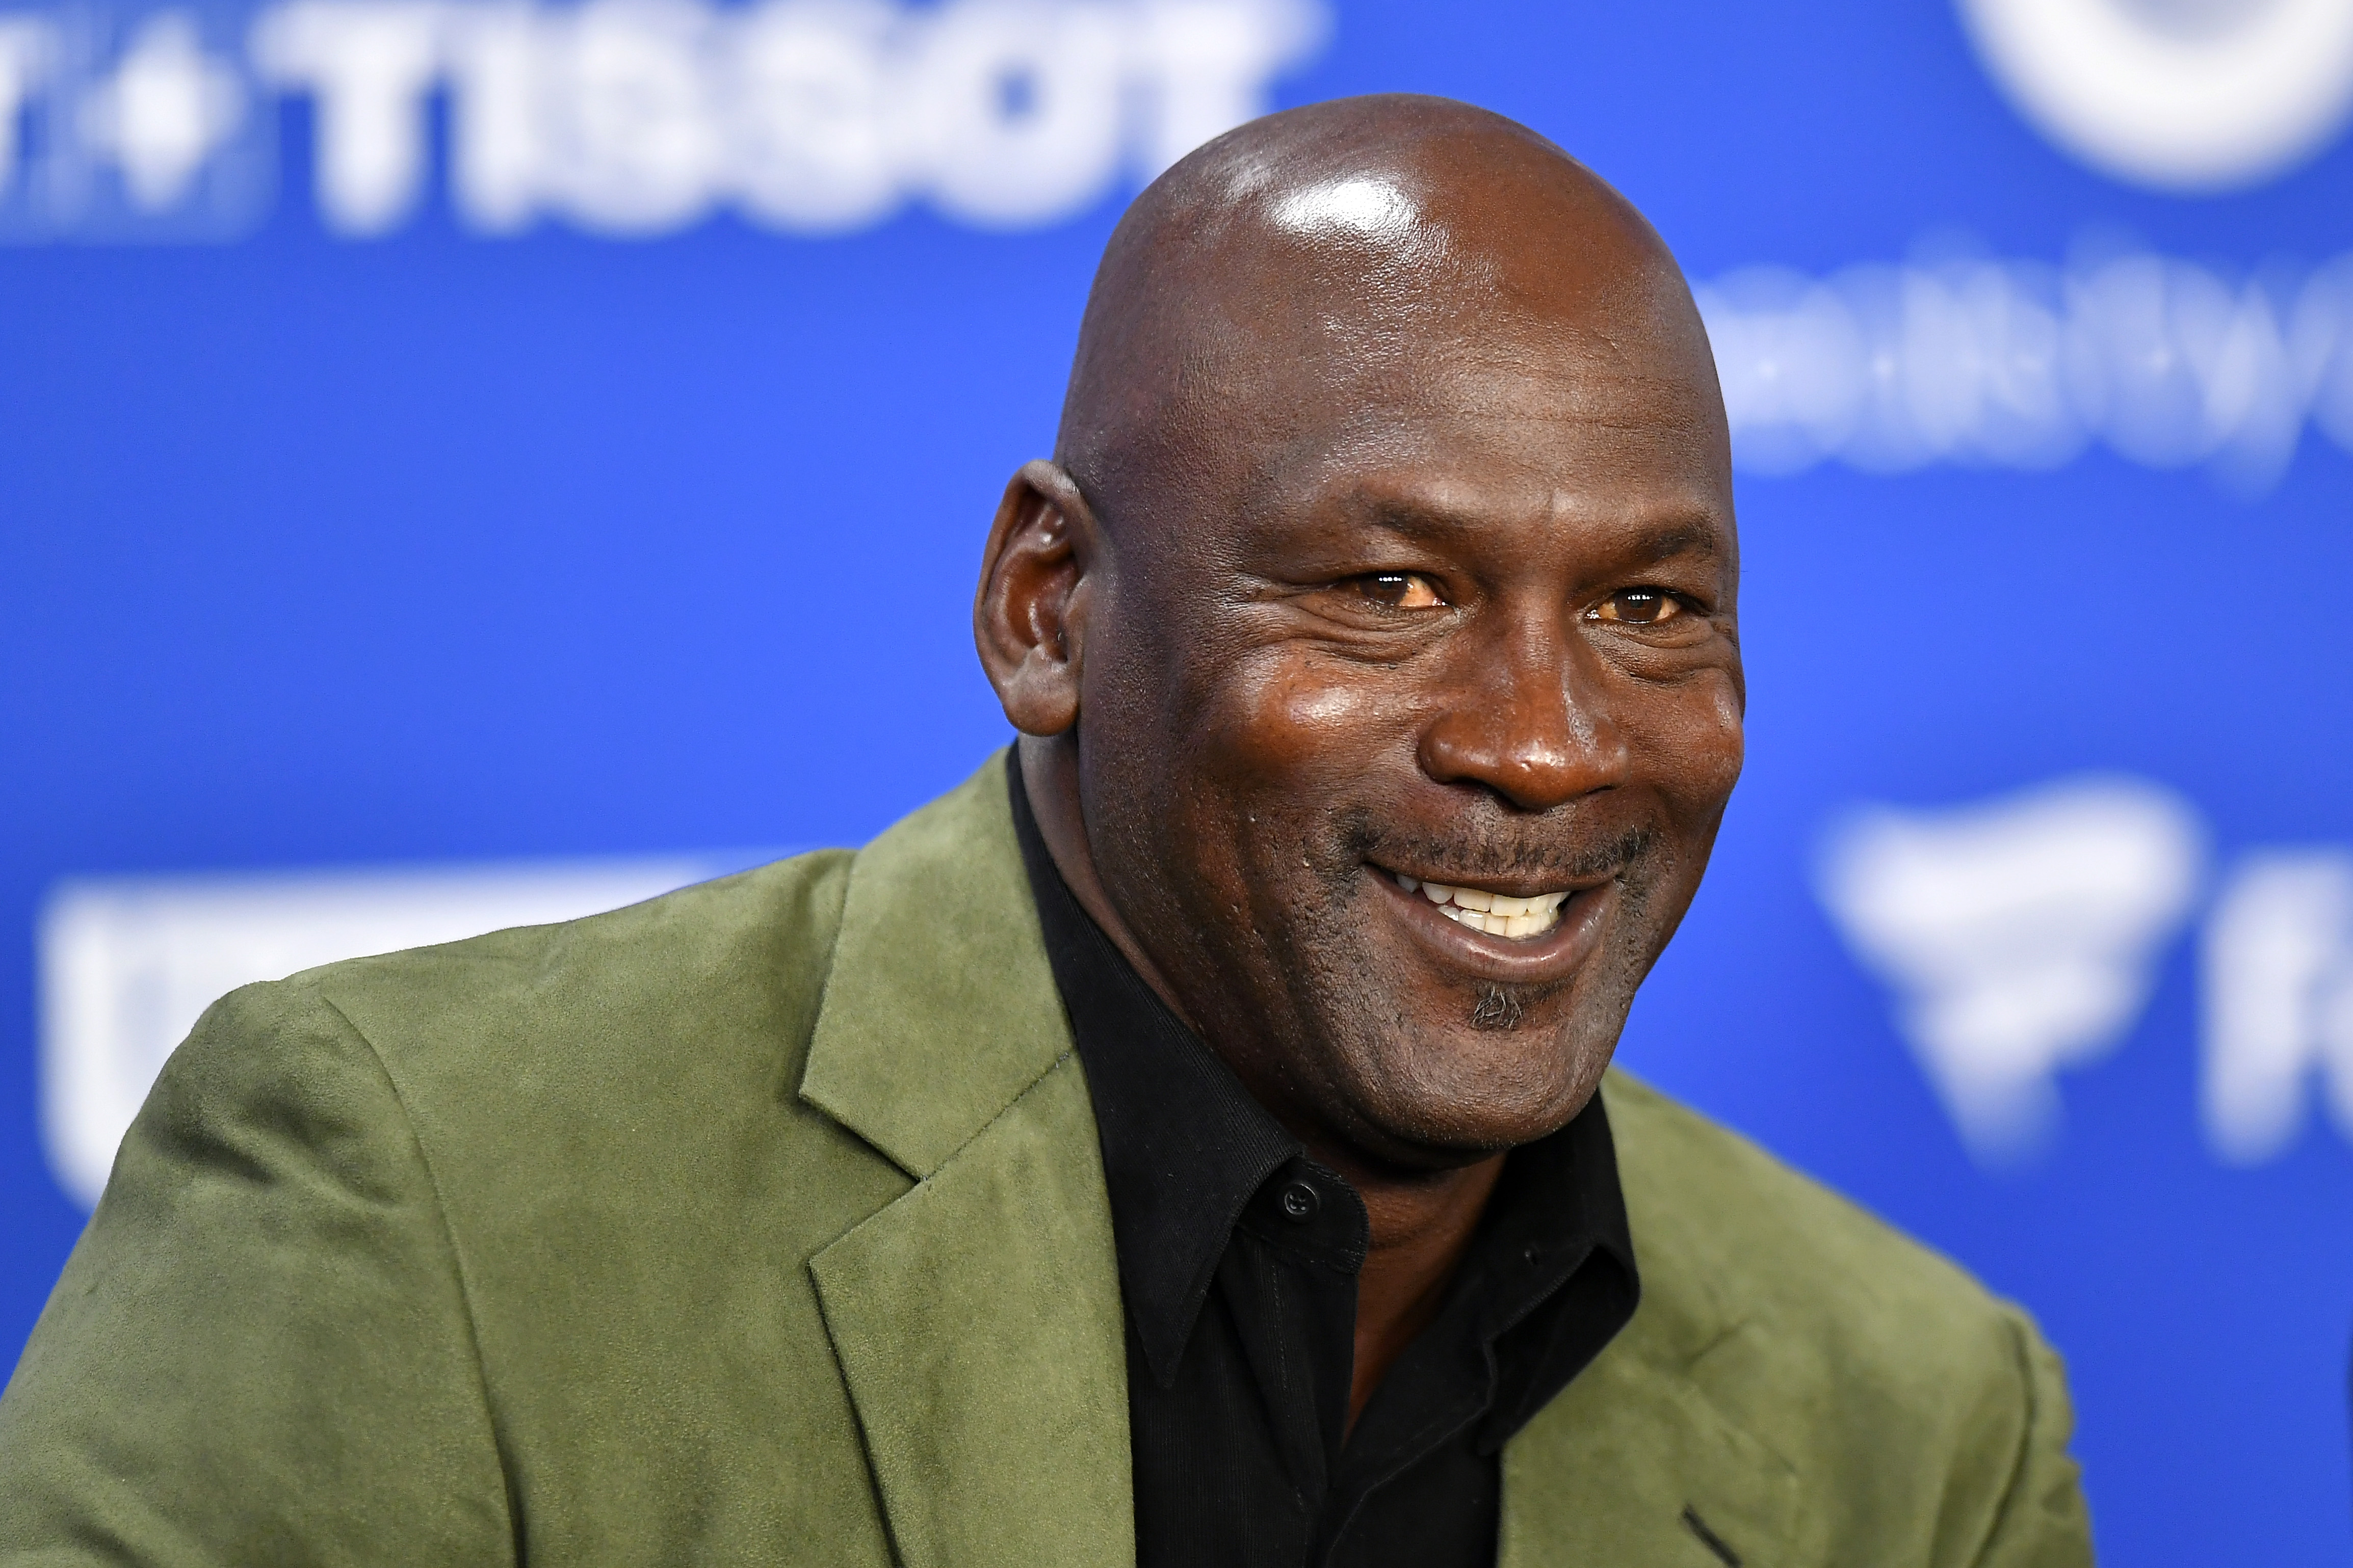 Michael Jordan attends a press conference on January 24, 2020 in Paris, France | Source: Getty Images